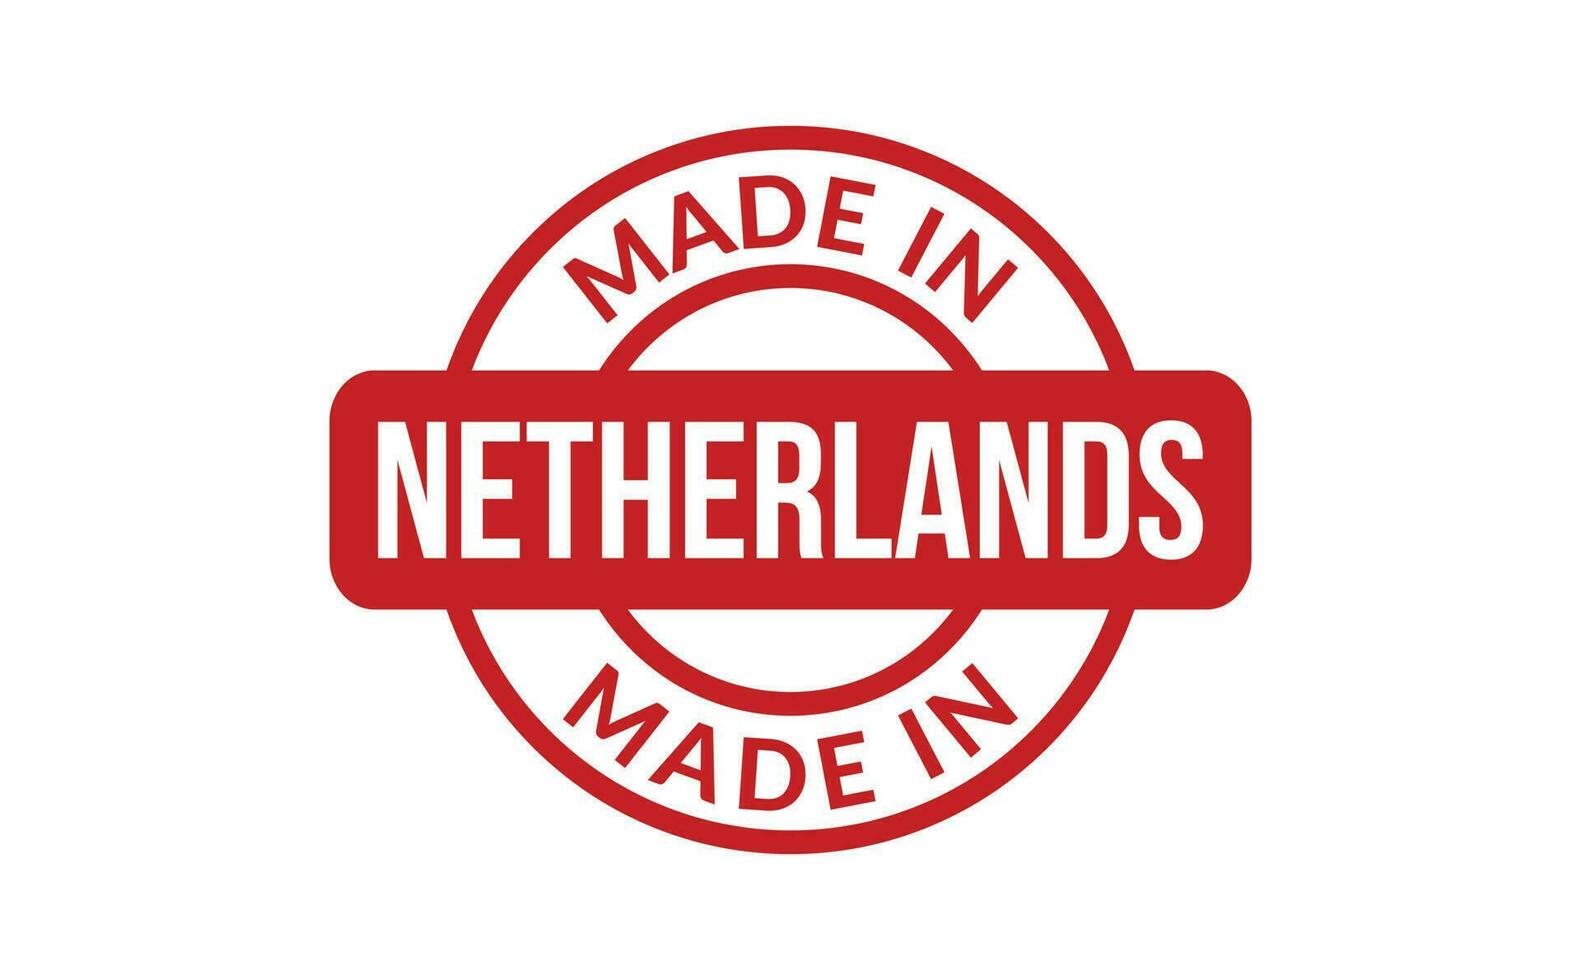 Made In Netherlands Rubber Stamp vector